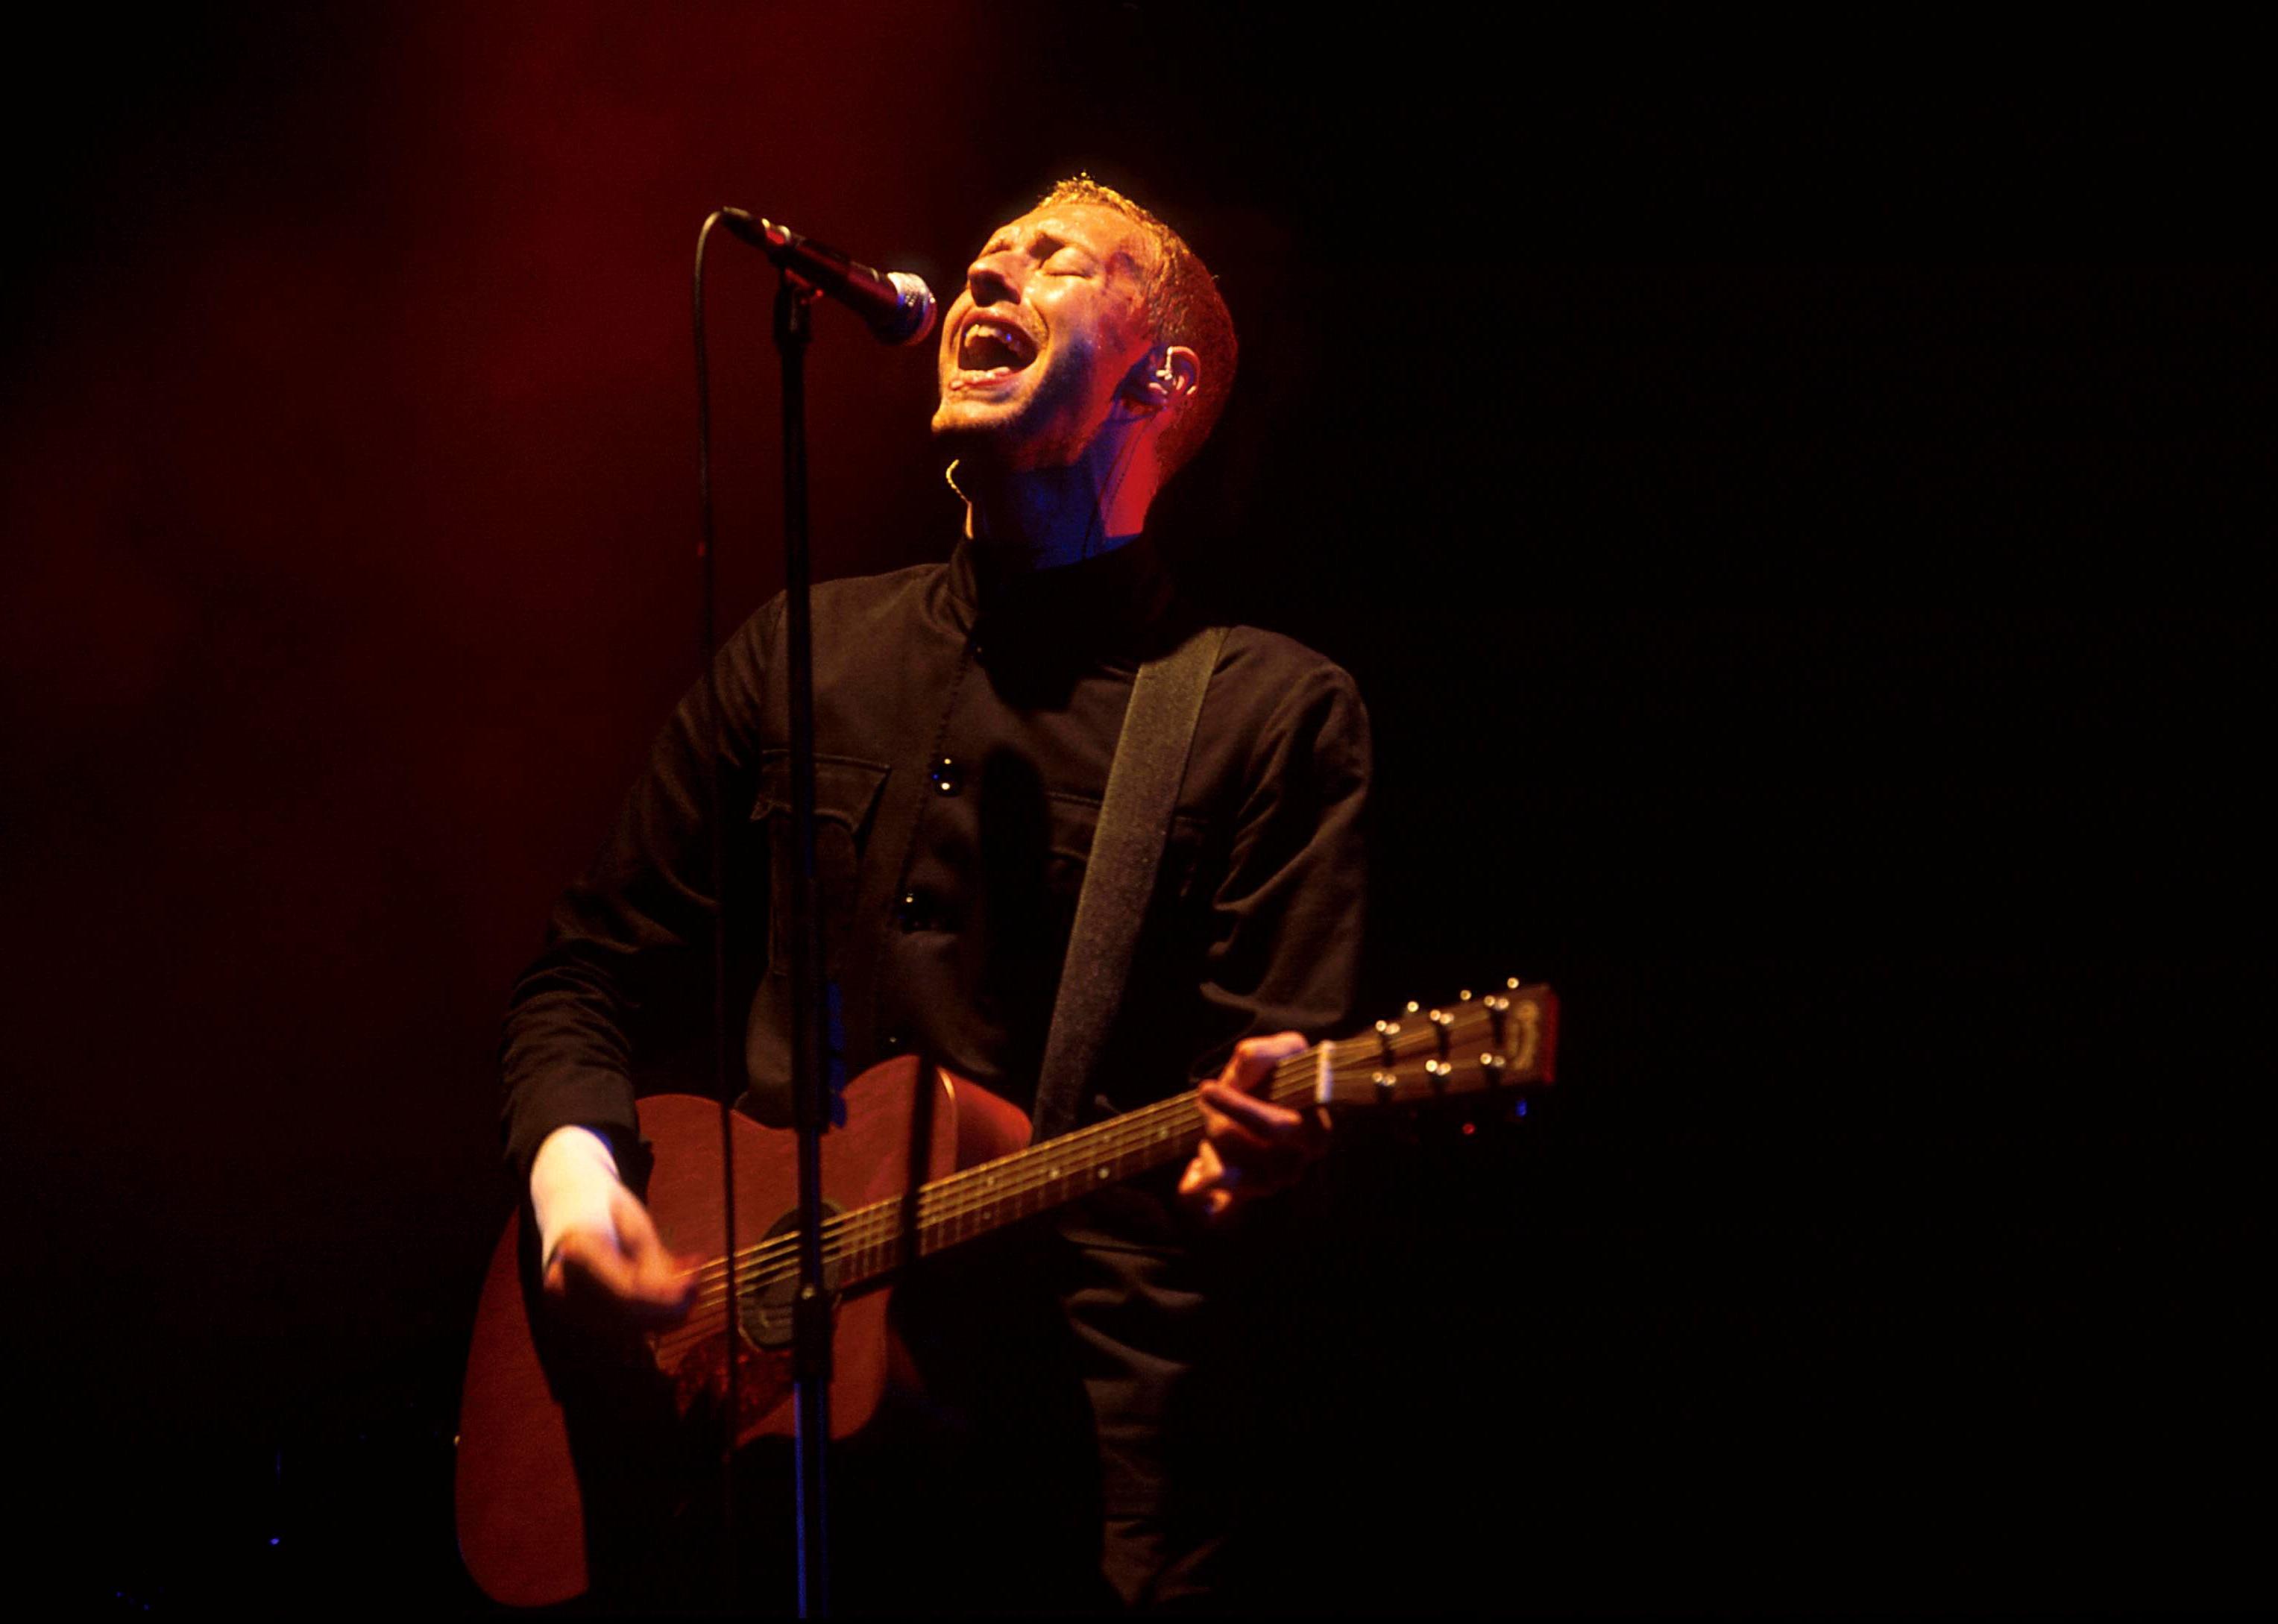 Chris Martin of Coldplay sings a song